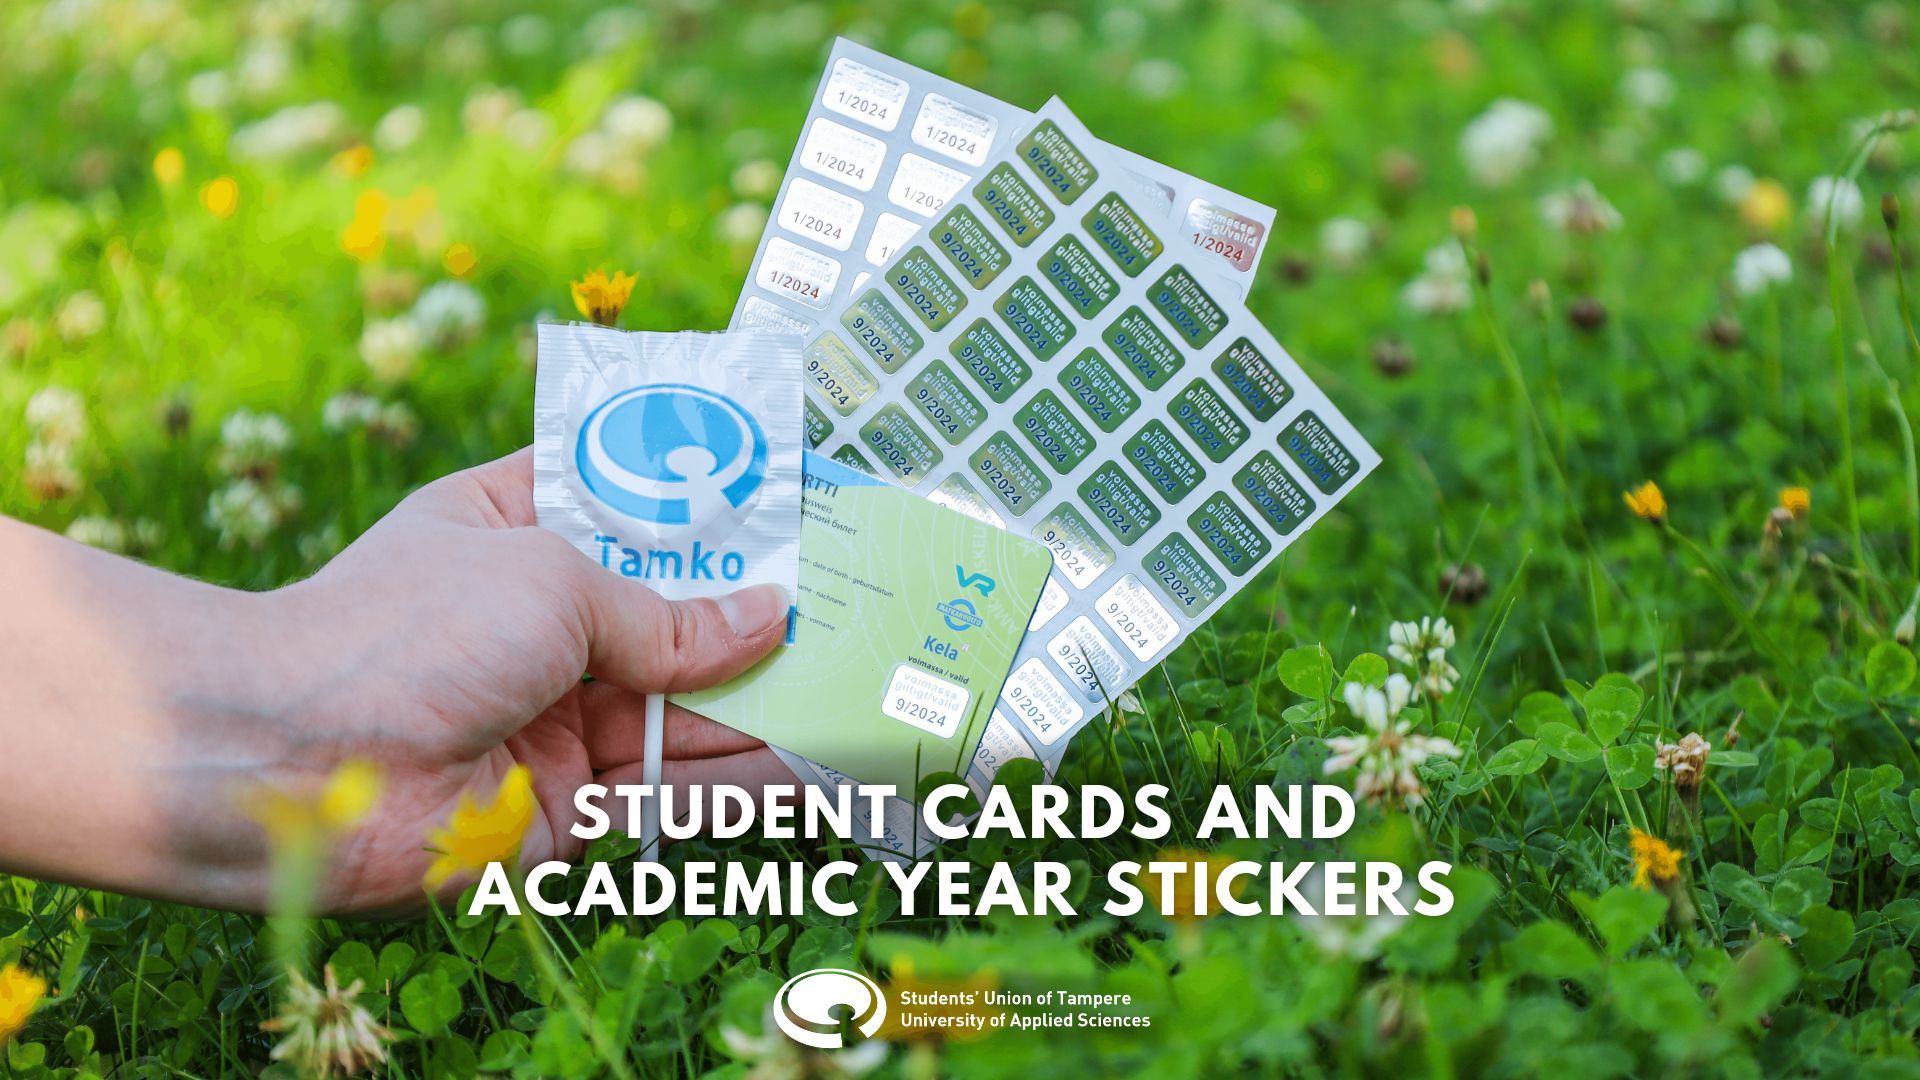 Student cards and academic year stickers